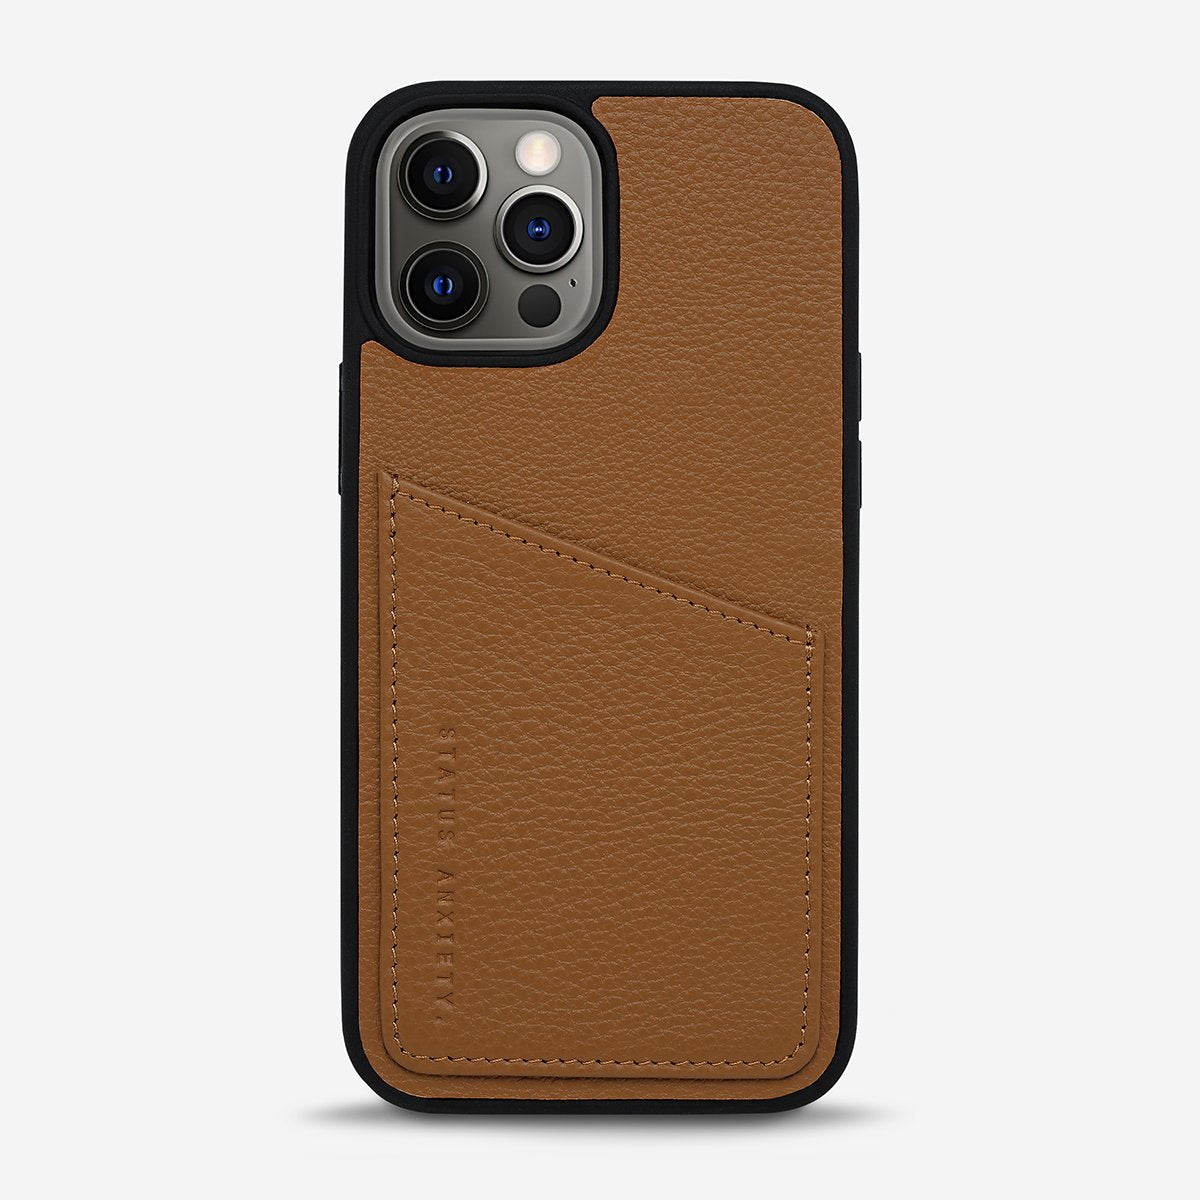 Who's Who Leather iPhone Case in Tan